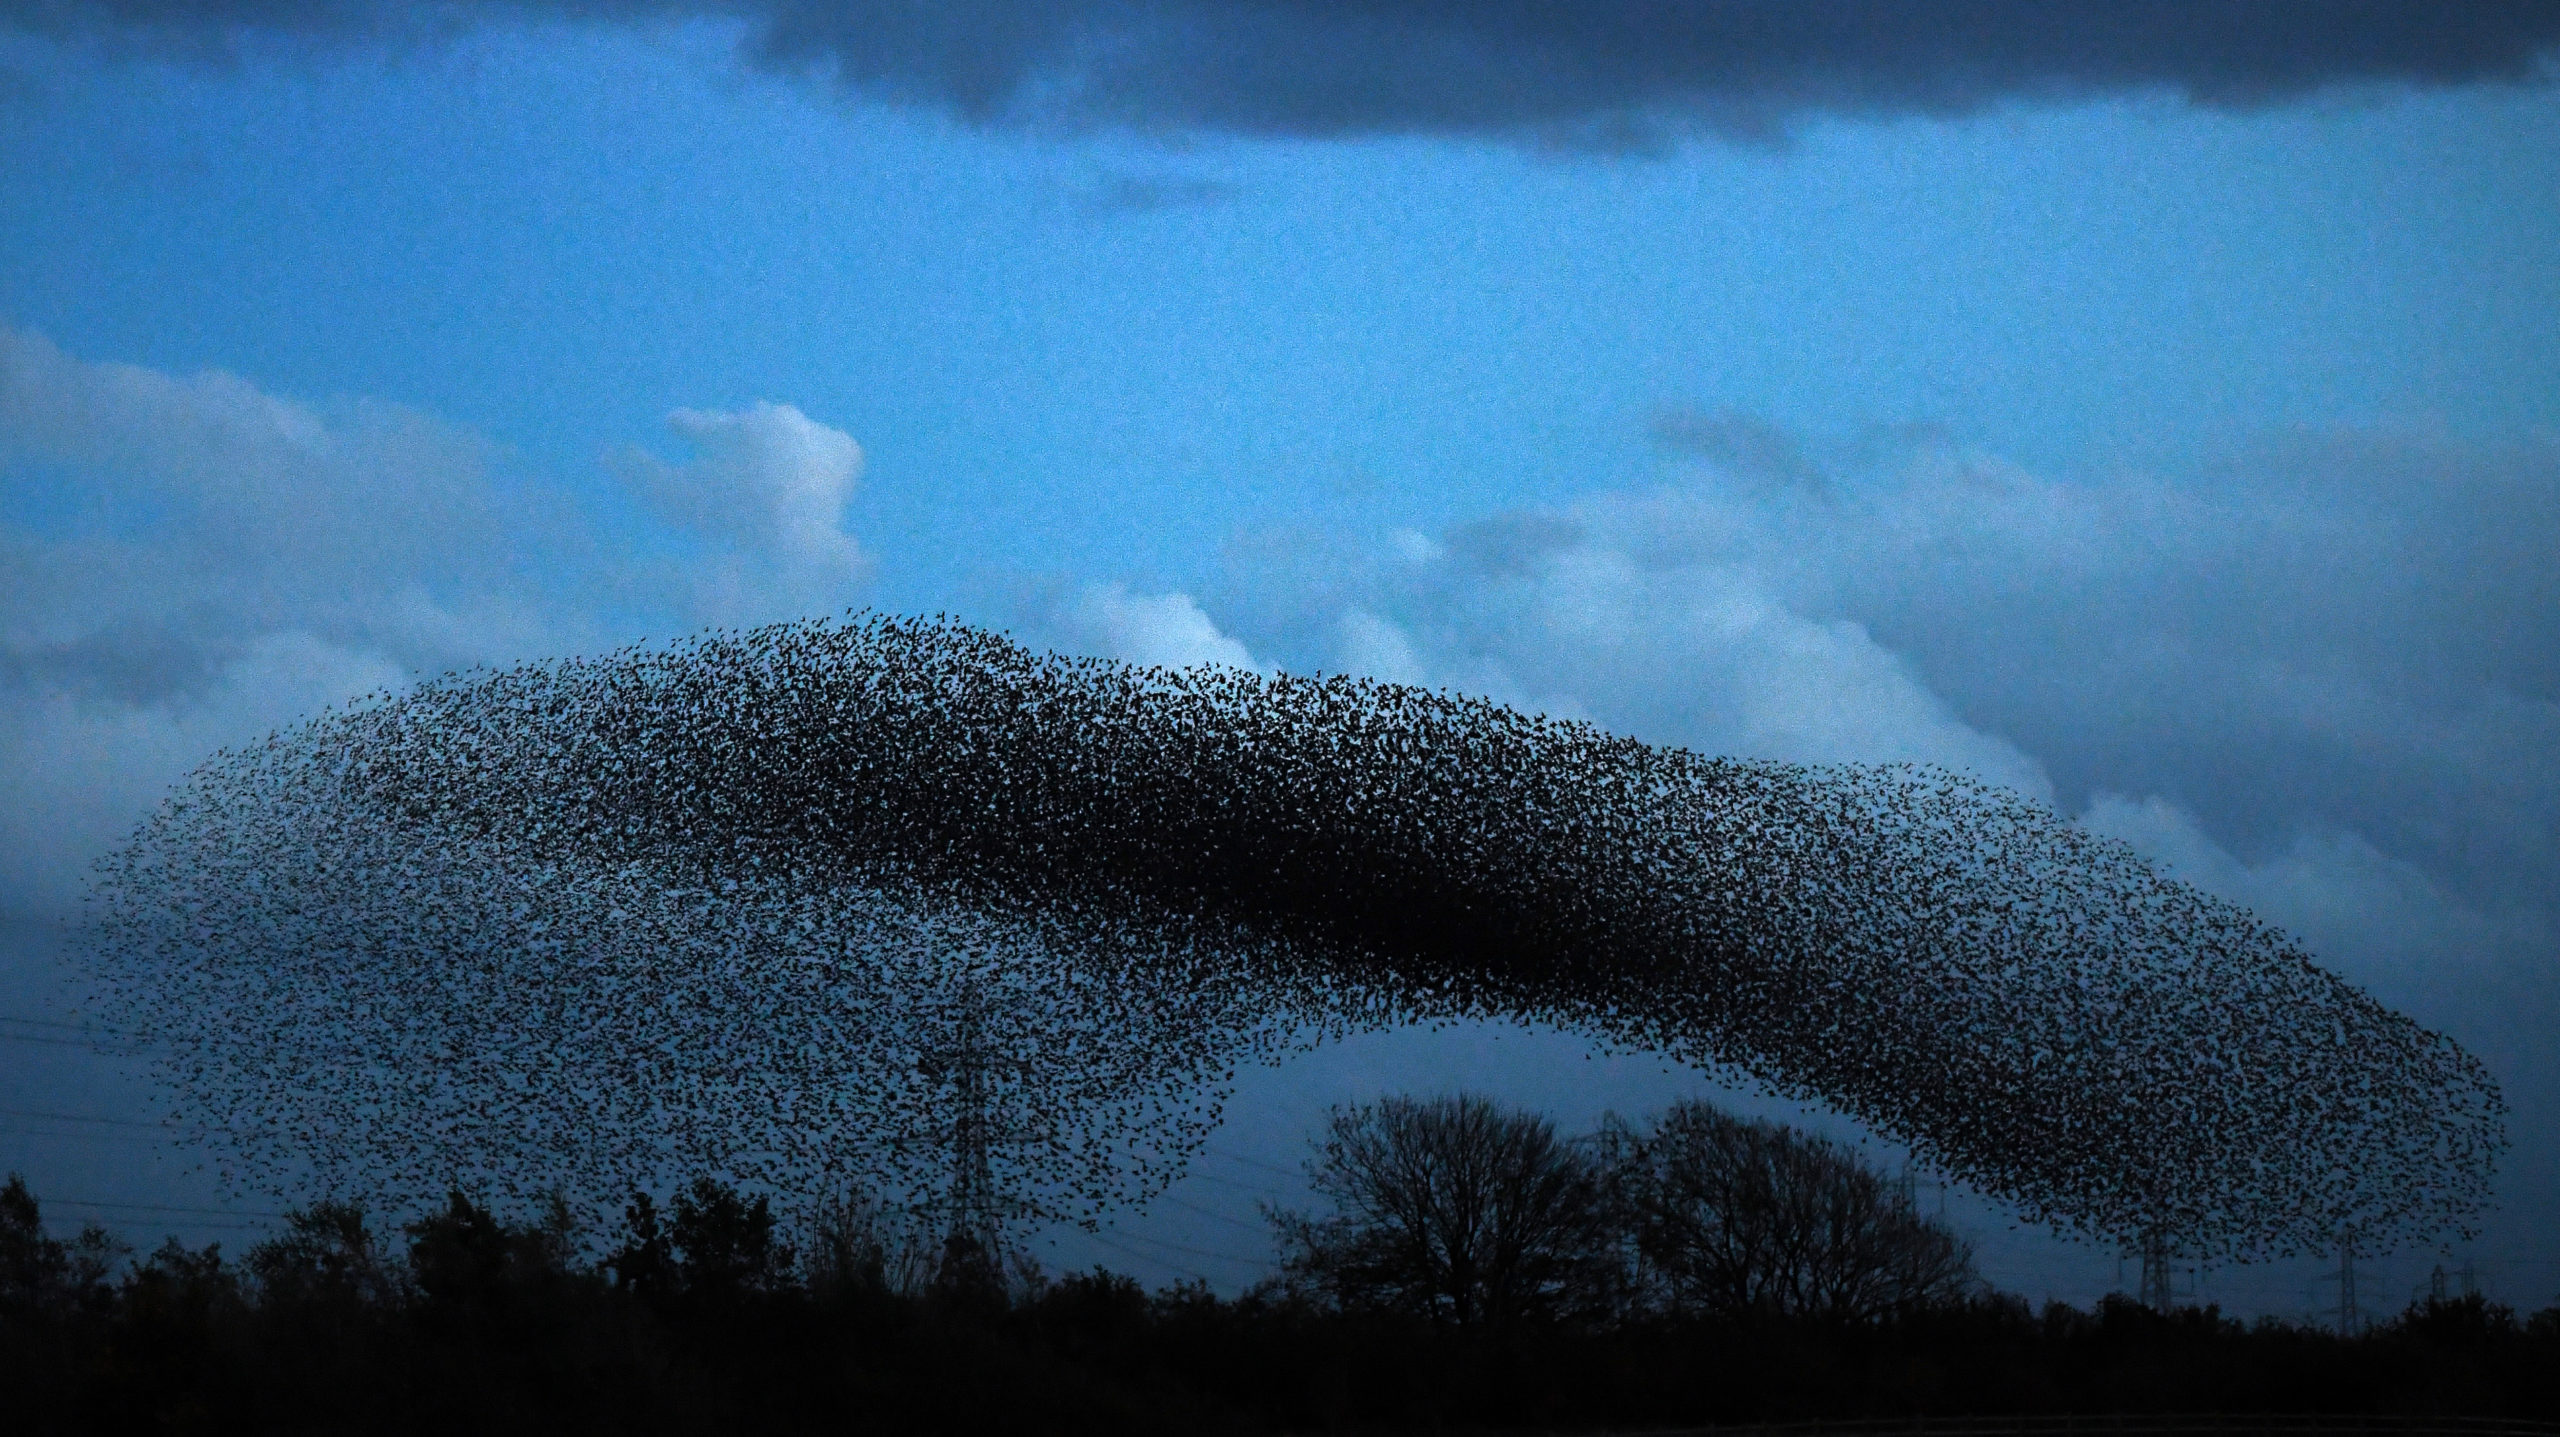 While we don't know the exact reason starlings act this way, until we do, we can still enjoy the show. (Photo: Jeff J Mitchell, Getty Images)